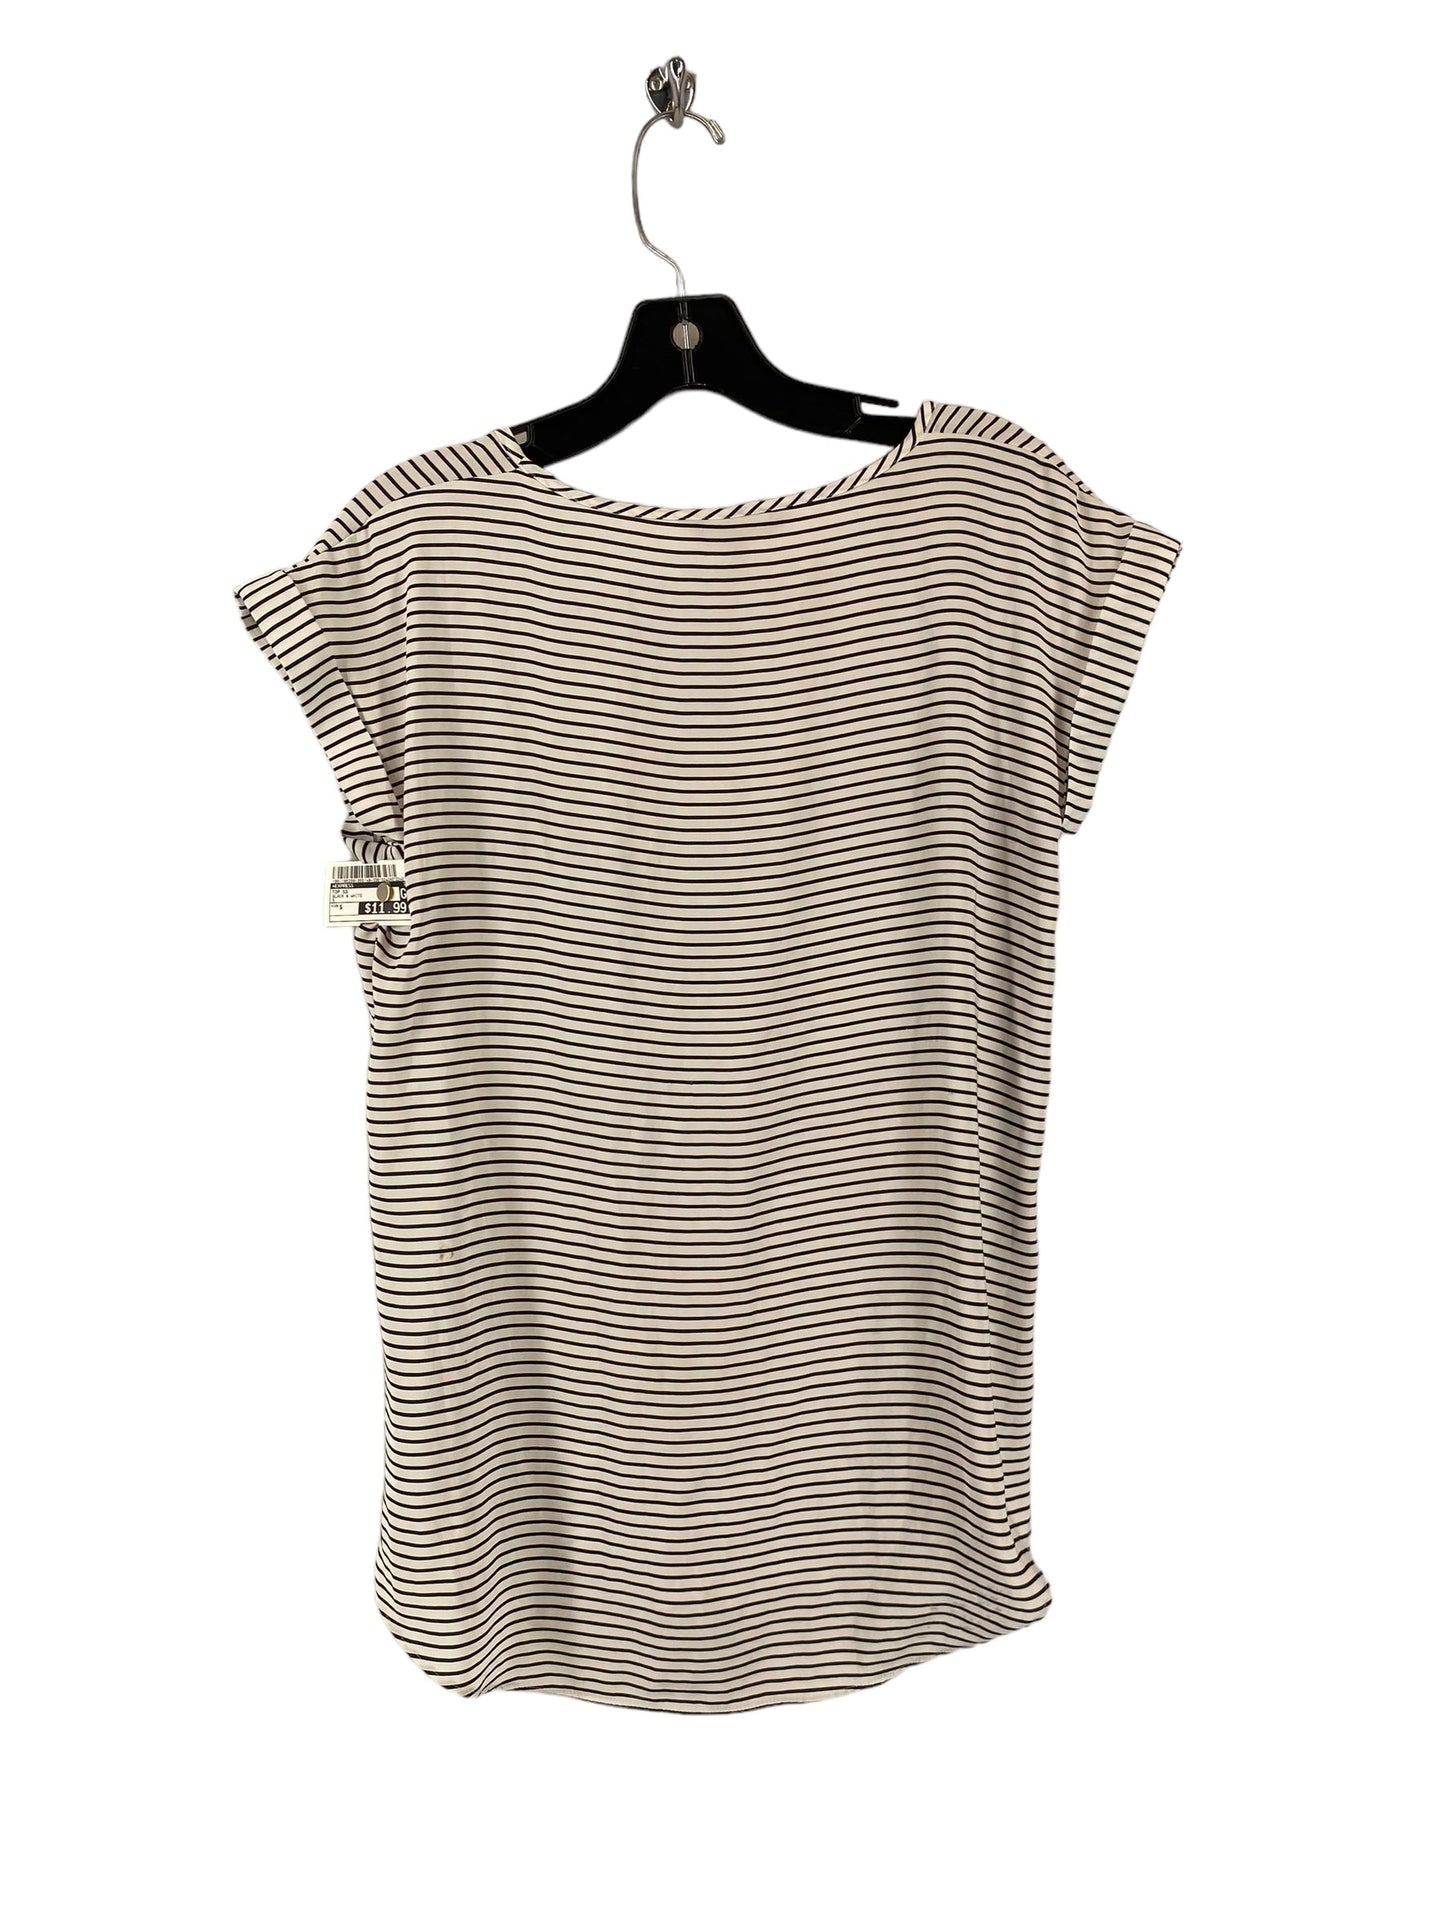 Black & White Top Short Sleeve Express, Size S